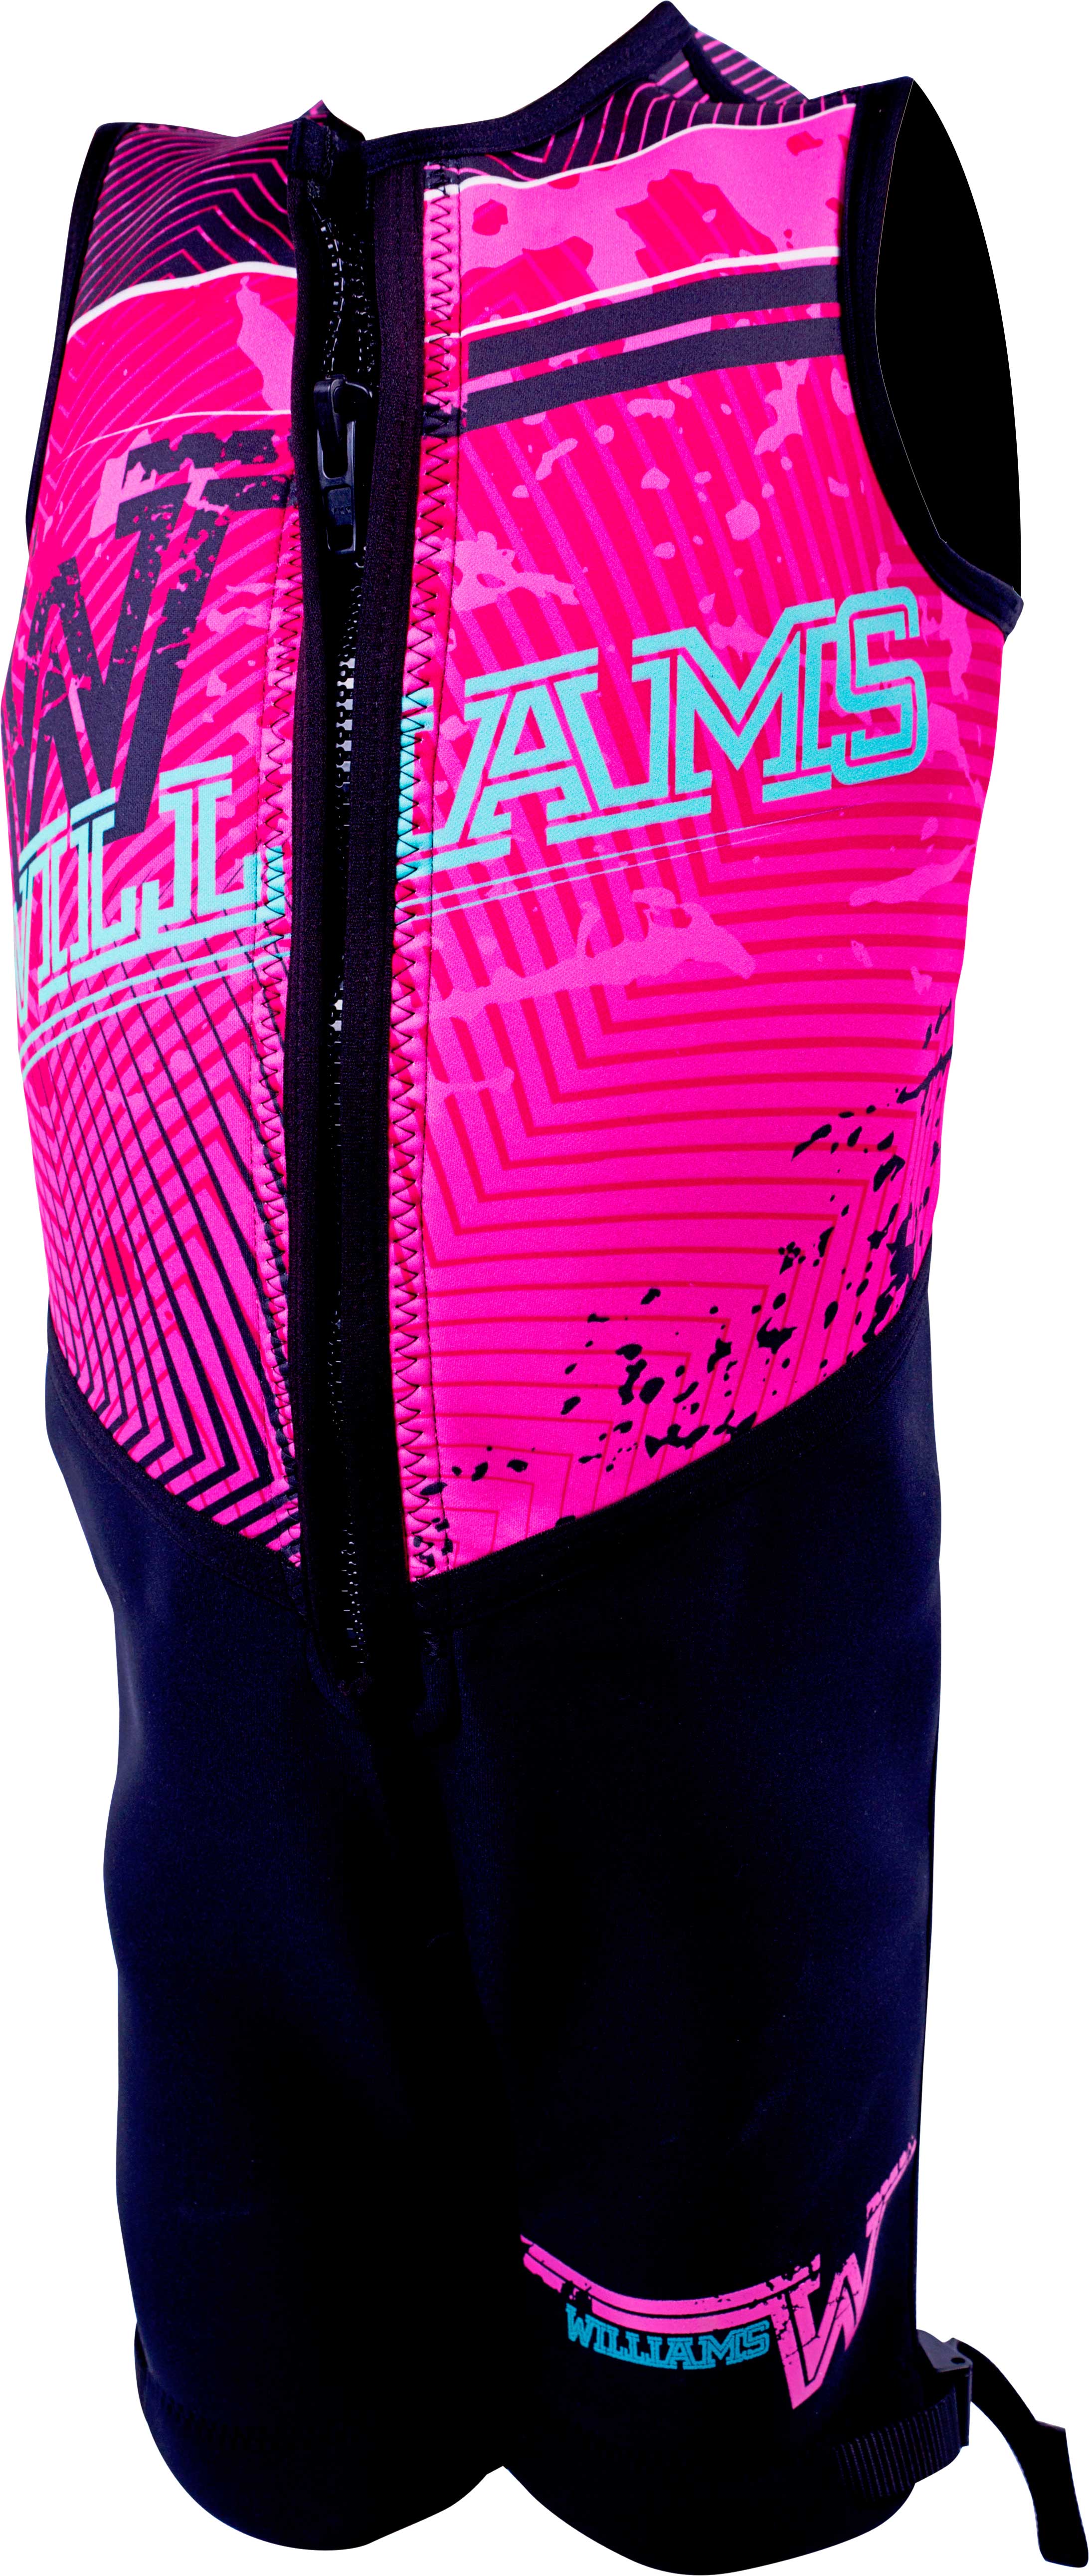 WILLIAMS YOUTH URBAN SPORTS BUOYANCY SUIT - PINK